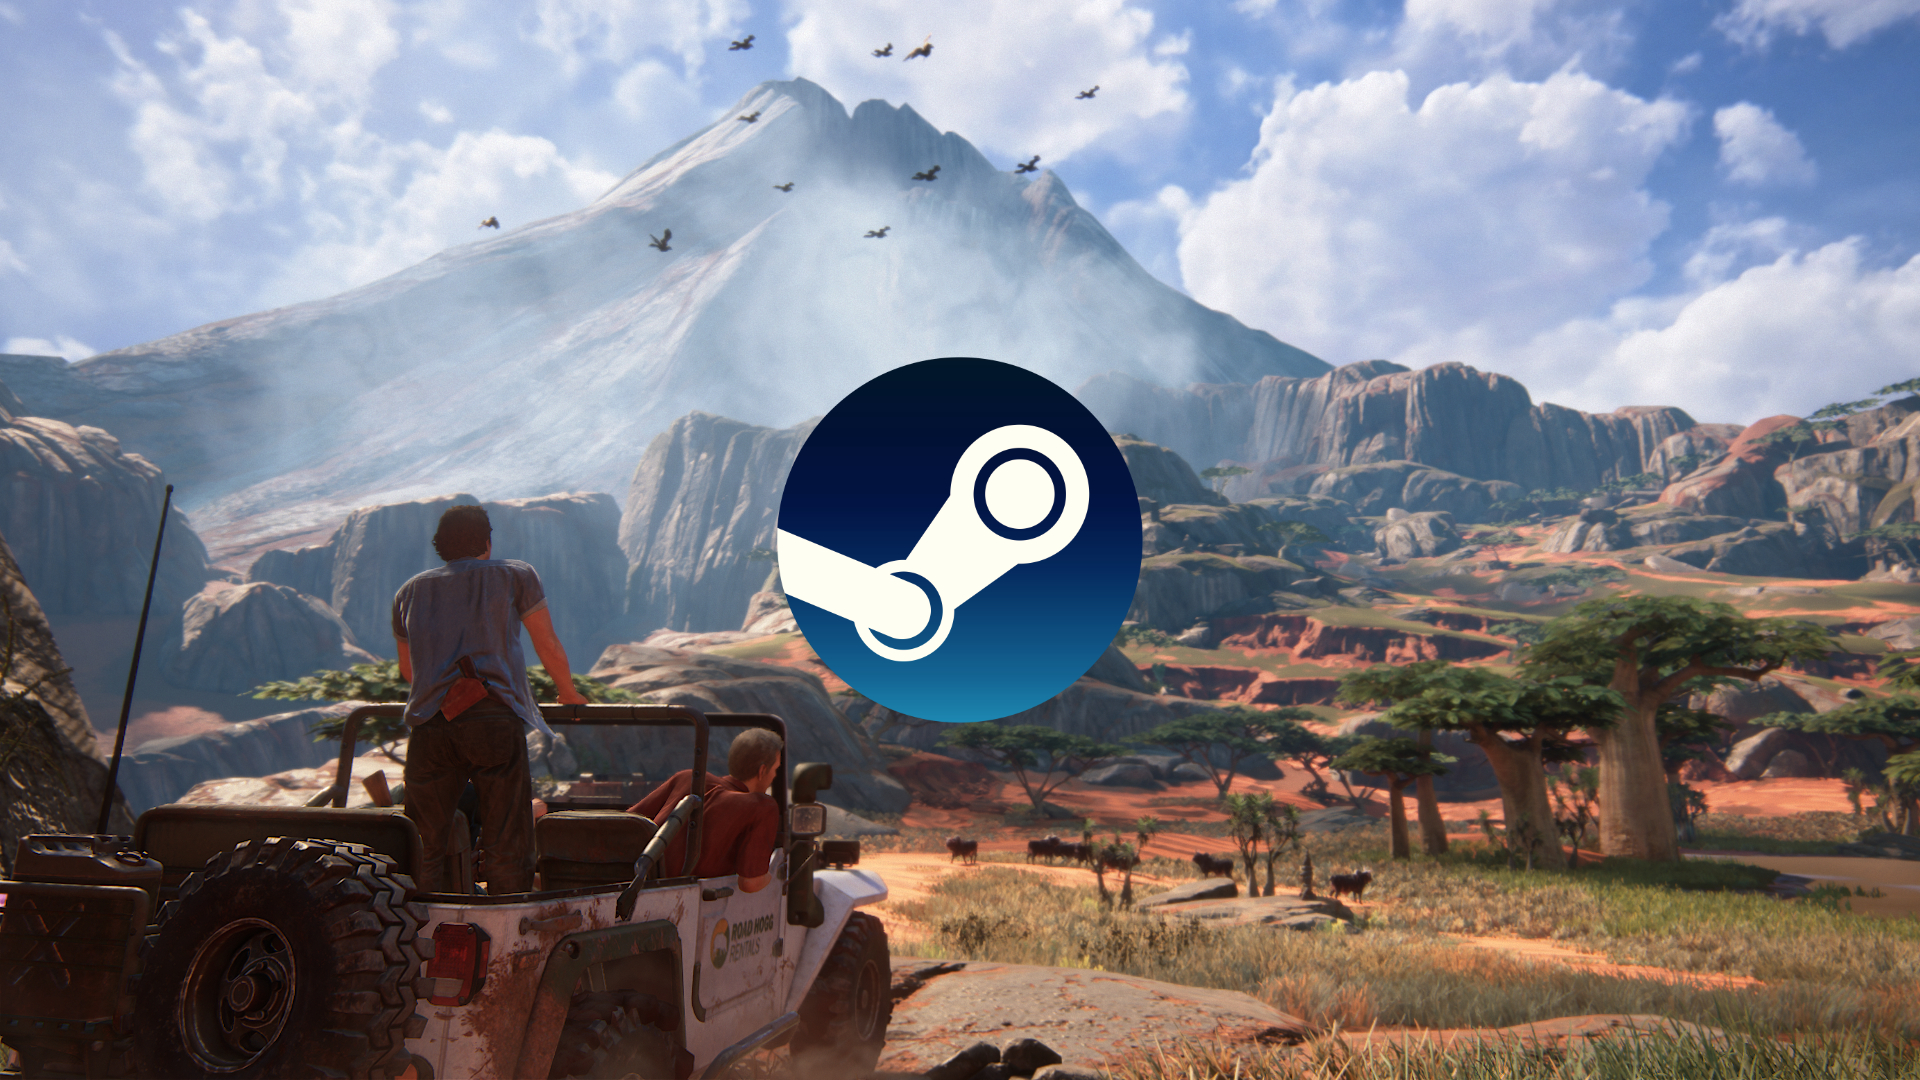 Looks like Uncharted 4 will be Sony's next big PC game